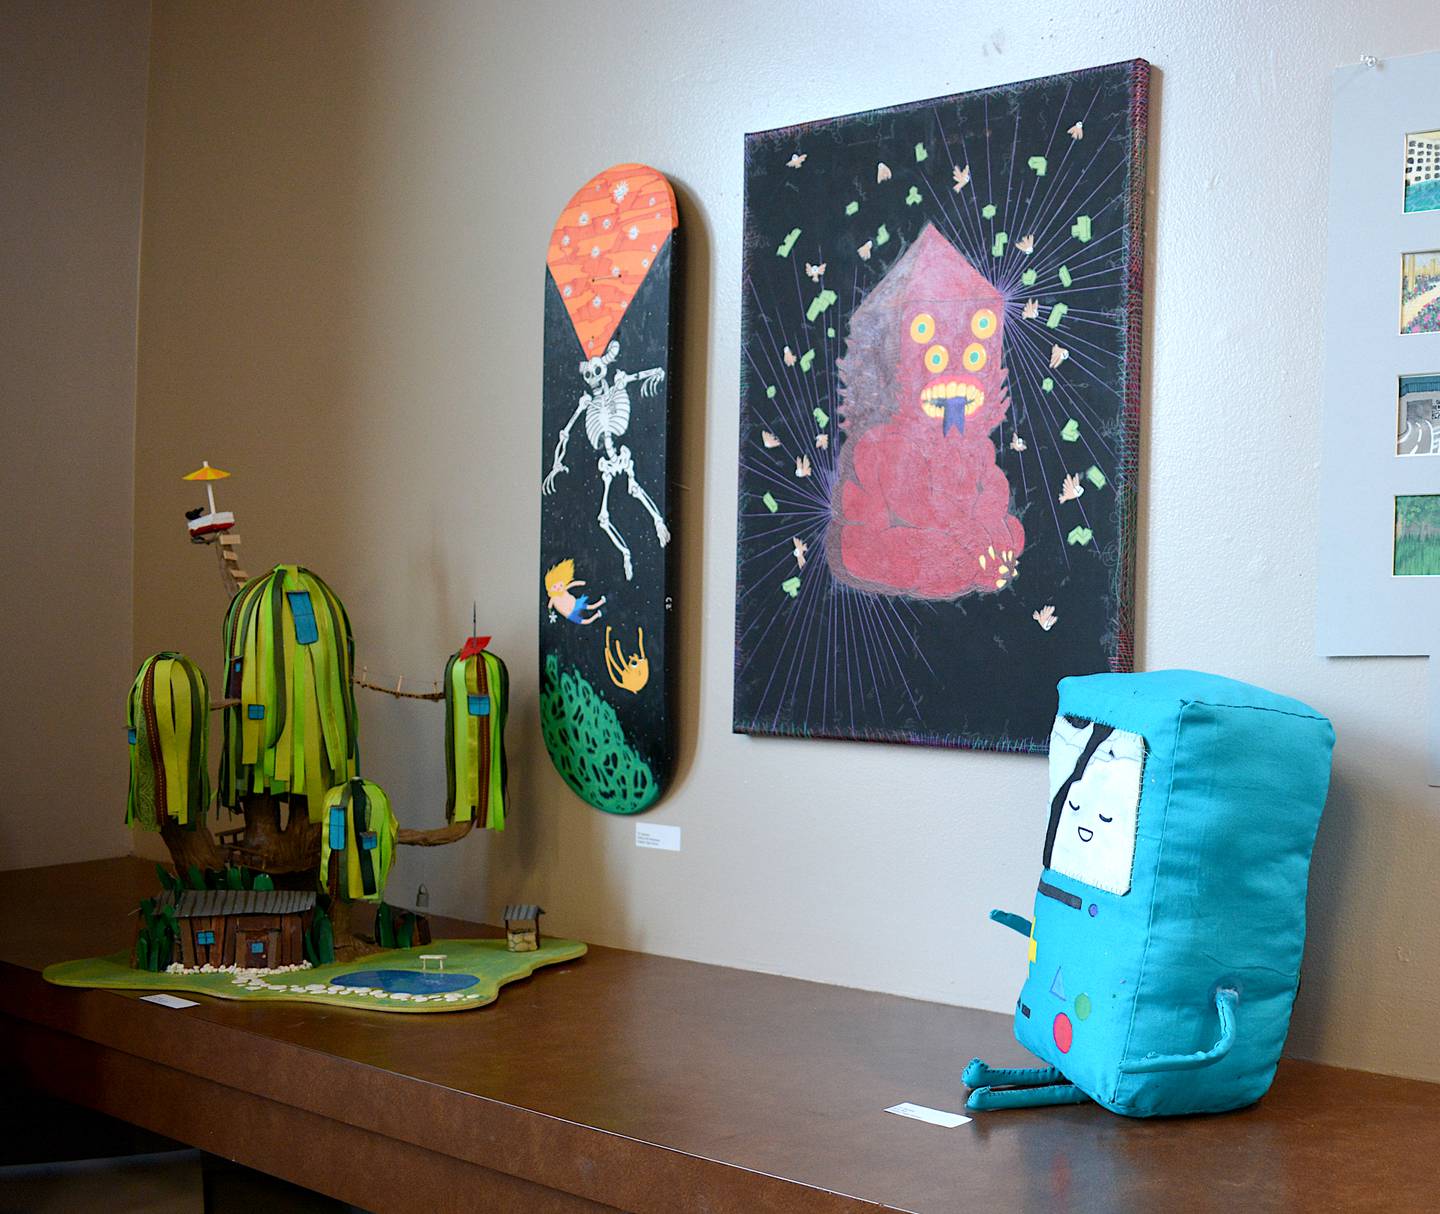 A collection of various art pieces made by CC Zachary based on imagery in cartoon series "Adventure Time." A skateboard deck shows what participants could expect from the "Art On Deck" program.